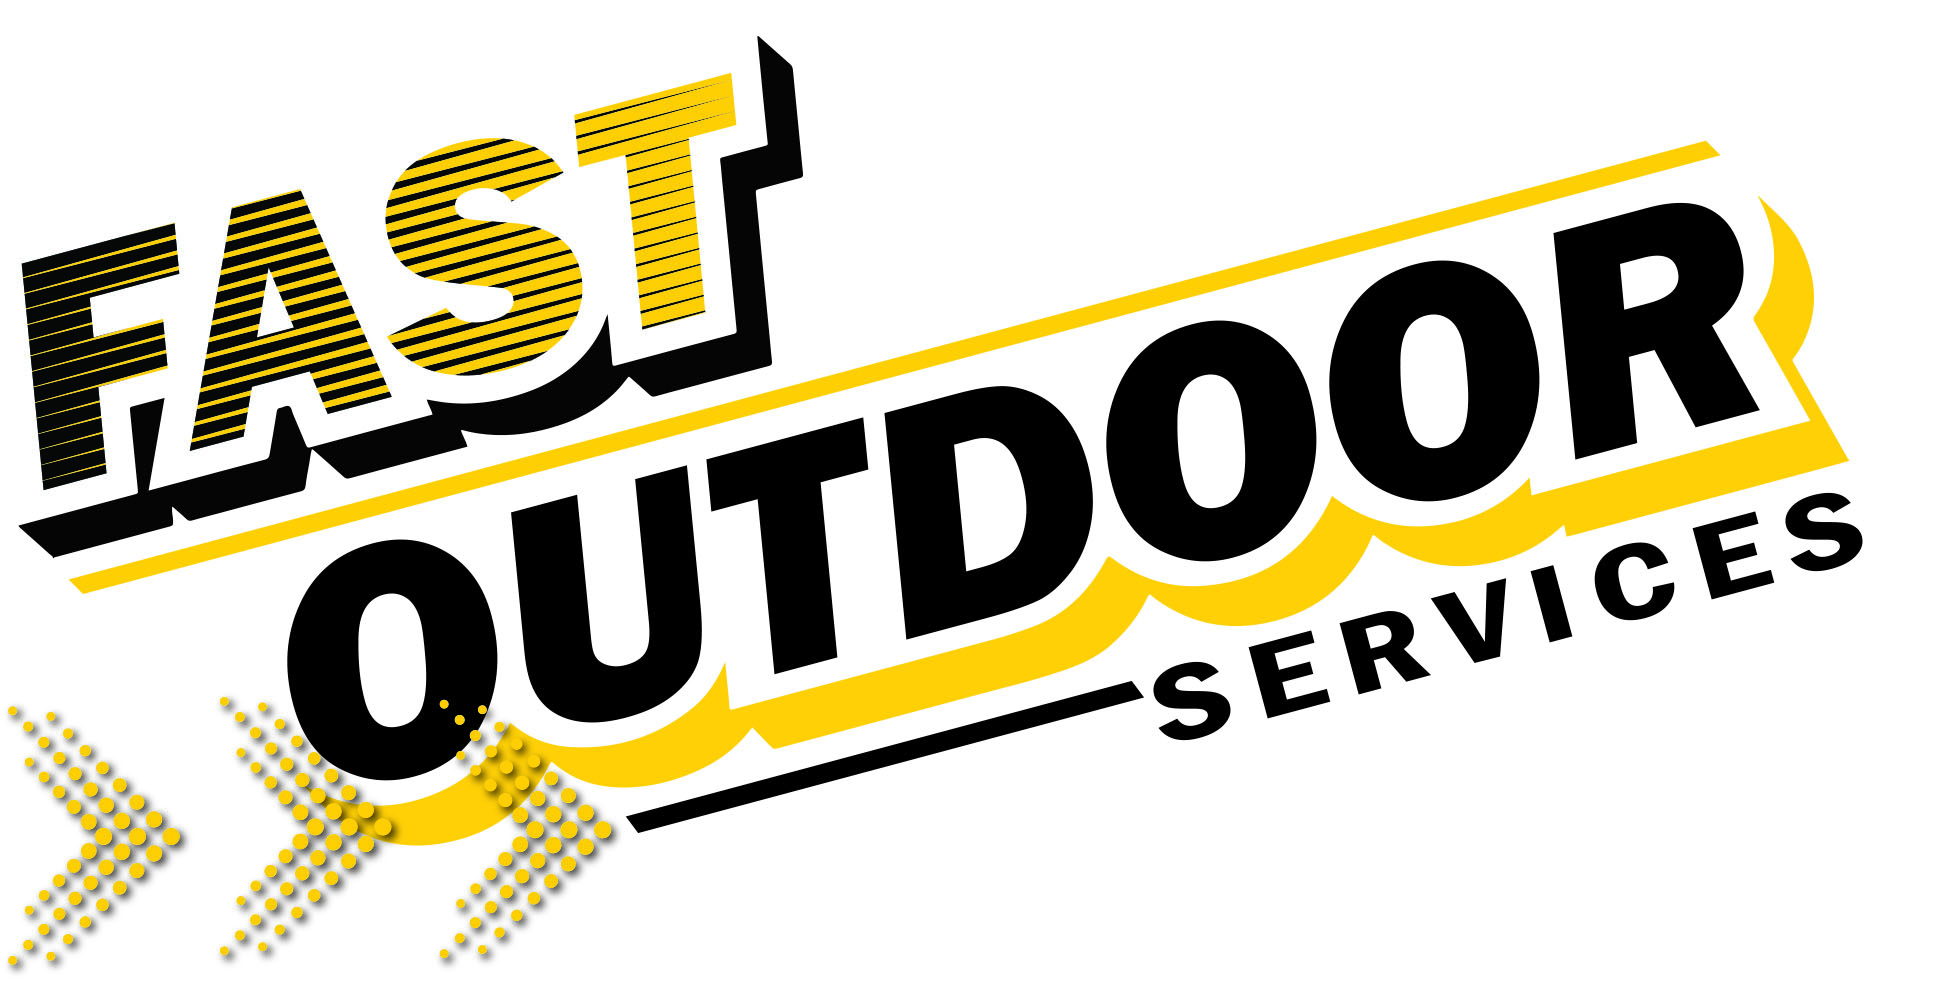 Fast Outdoor Service